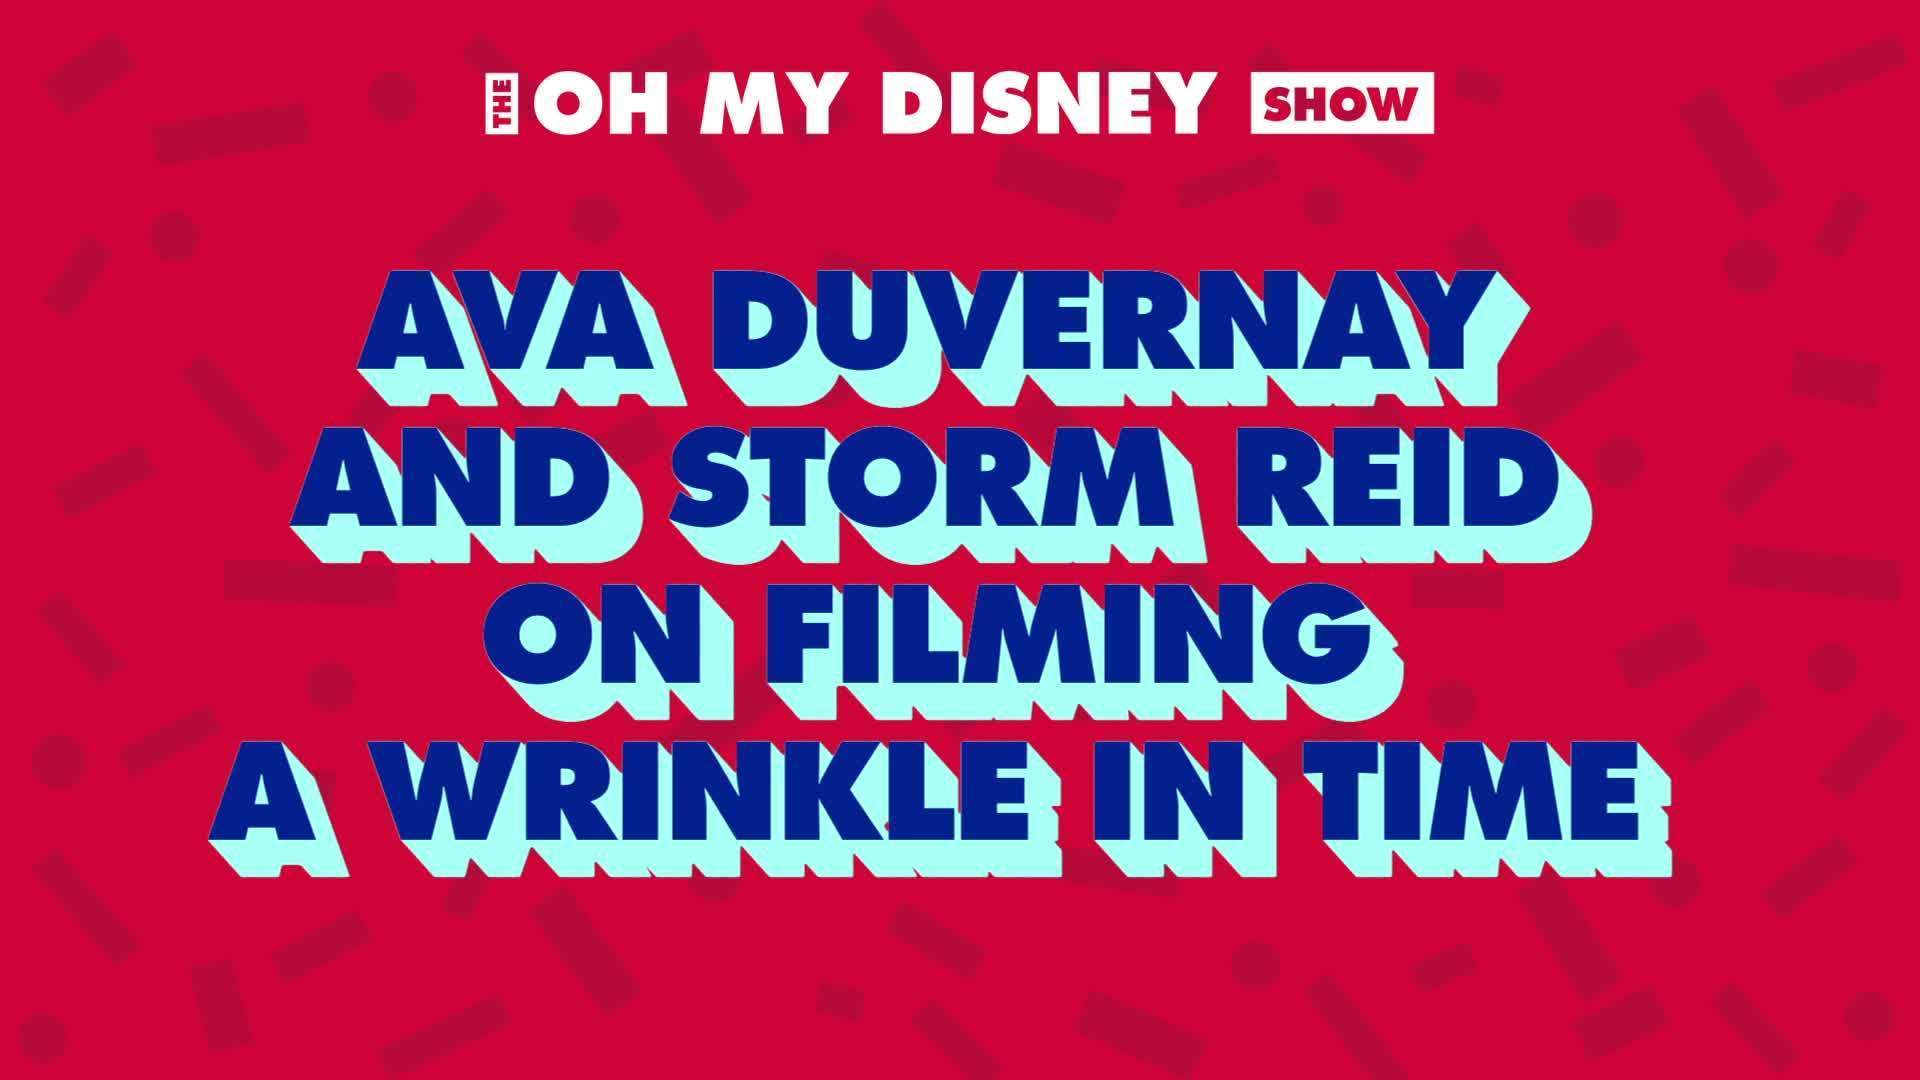 Ava DuVernay and Storm Reid Discuss Working on A Wrinkle in Time | Oh My Disney Show by Oh My Disney